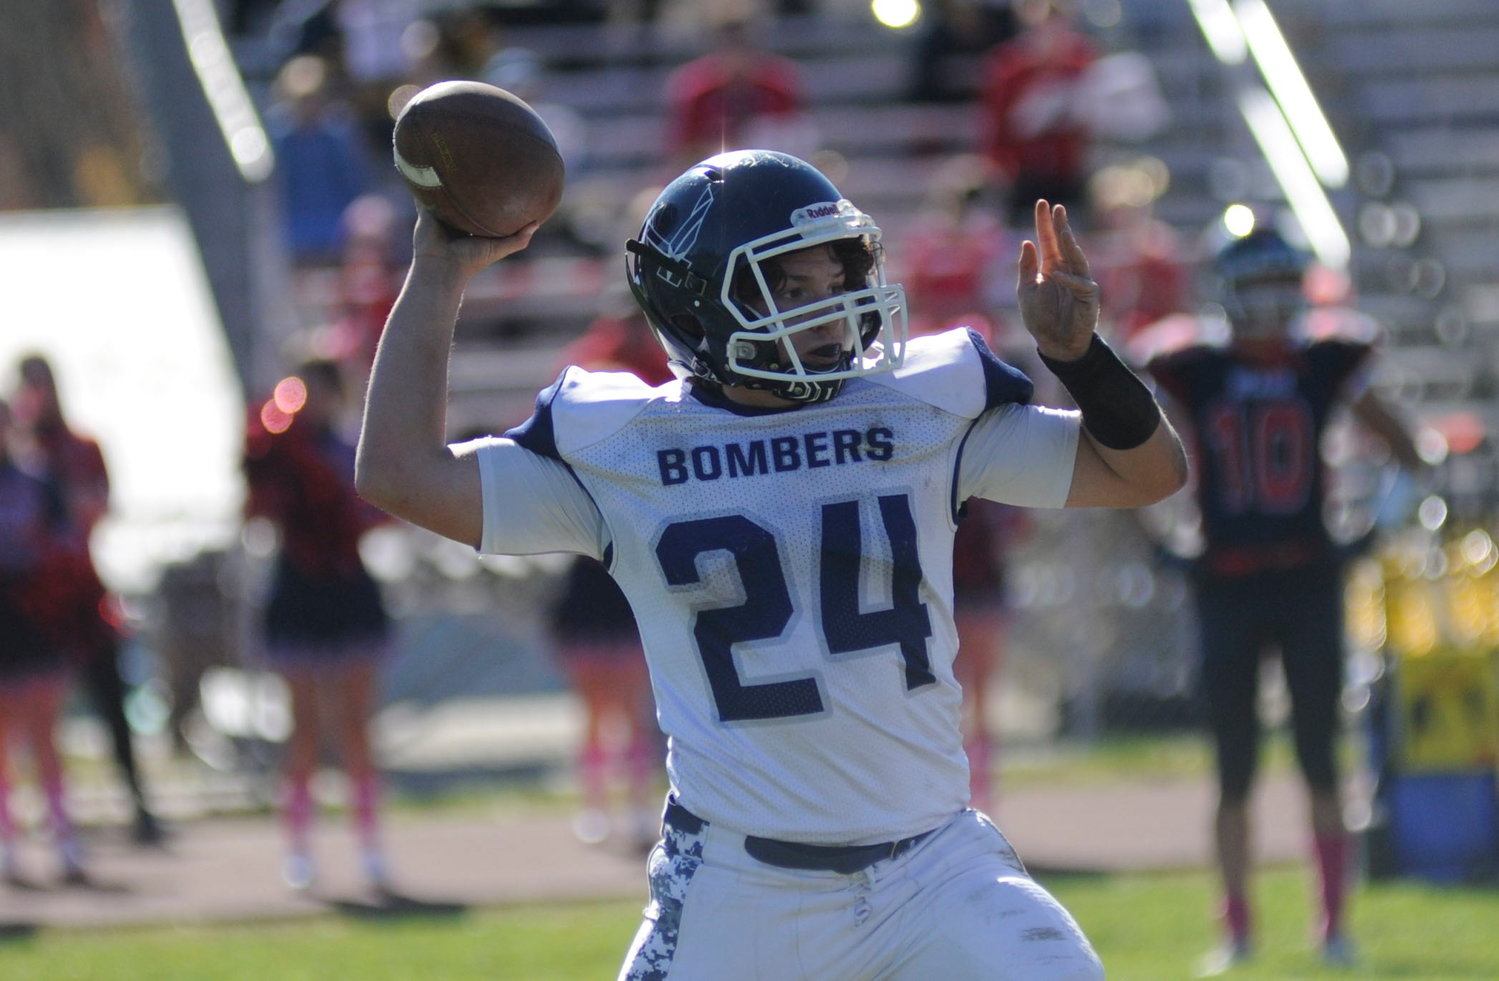 Launch zone.  Sidney Stracher, Pine Plains QB, racked up 5 aerial TDs.